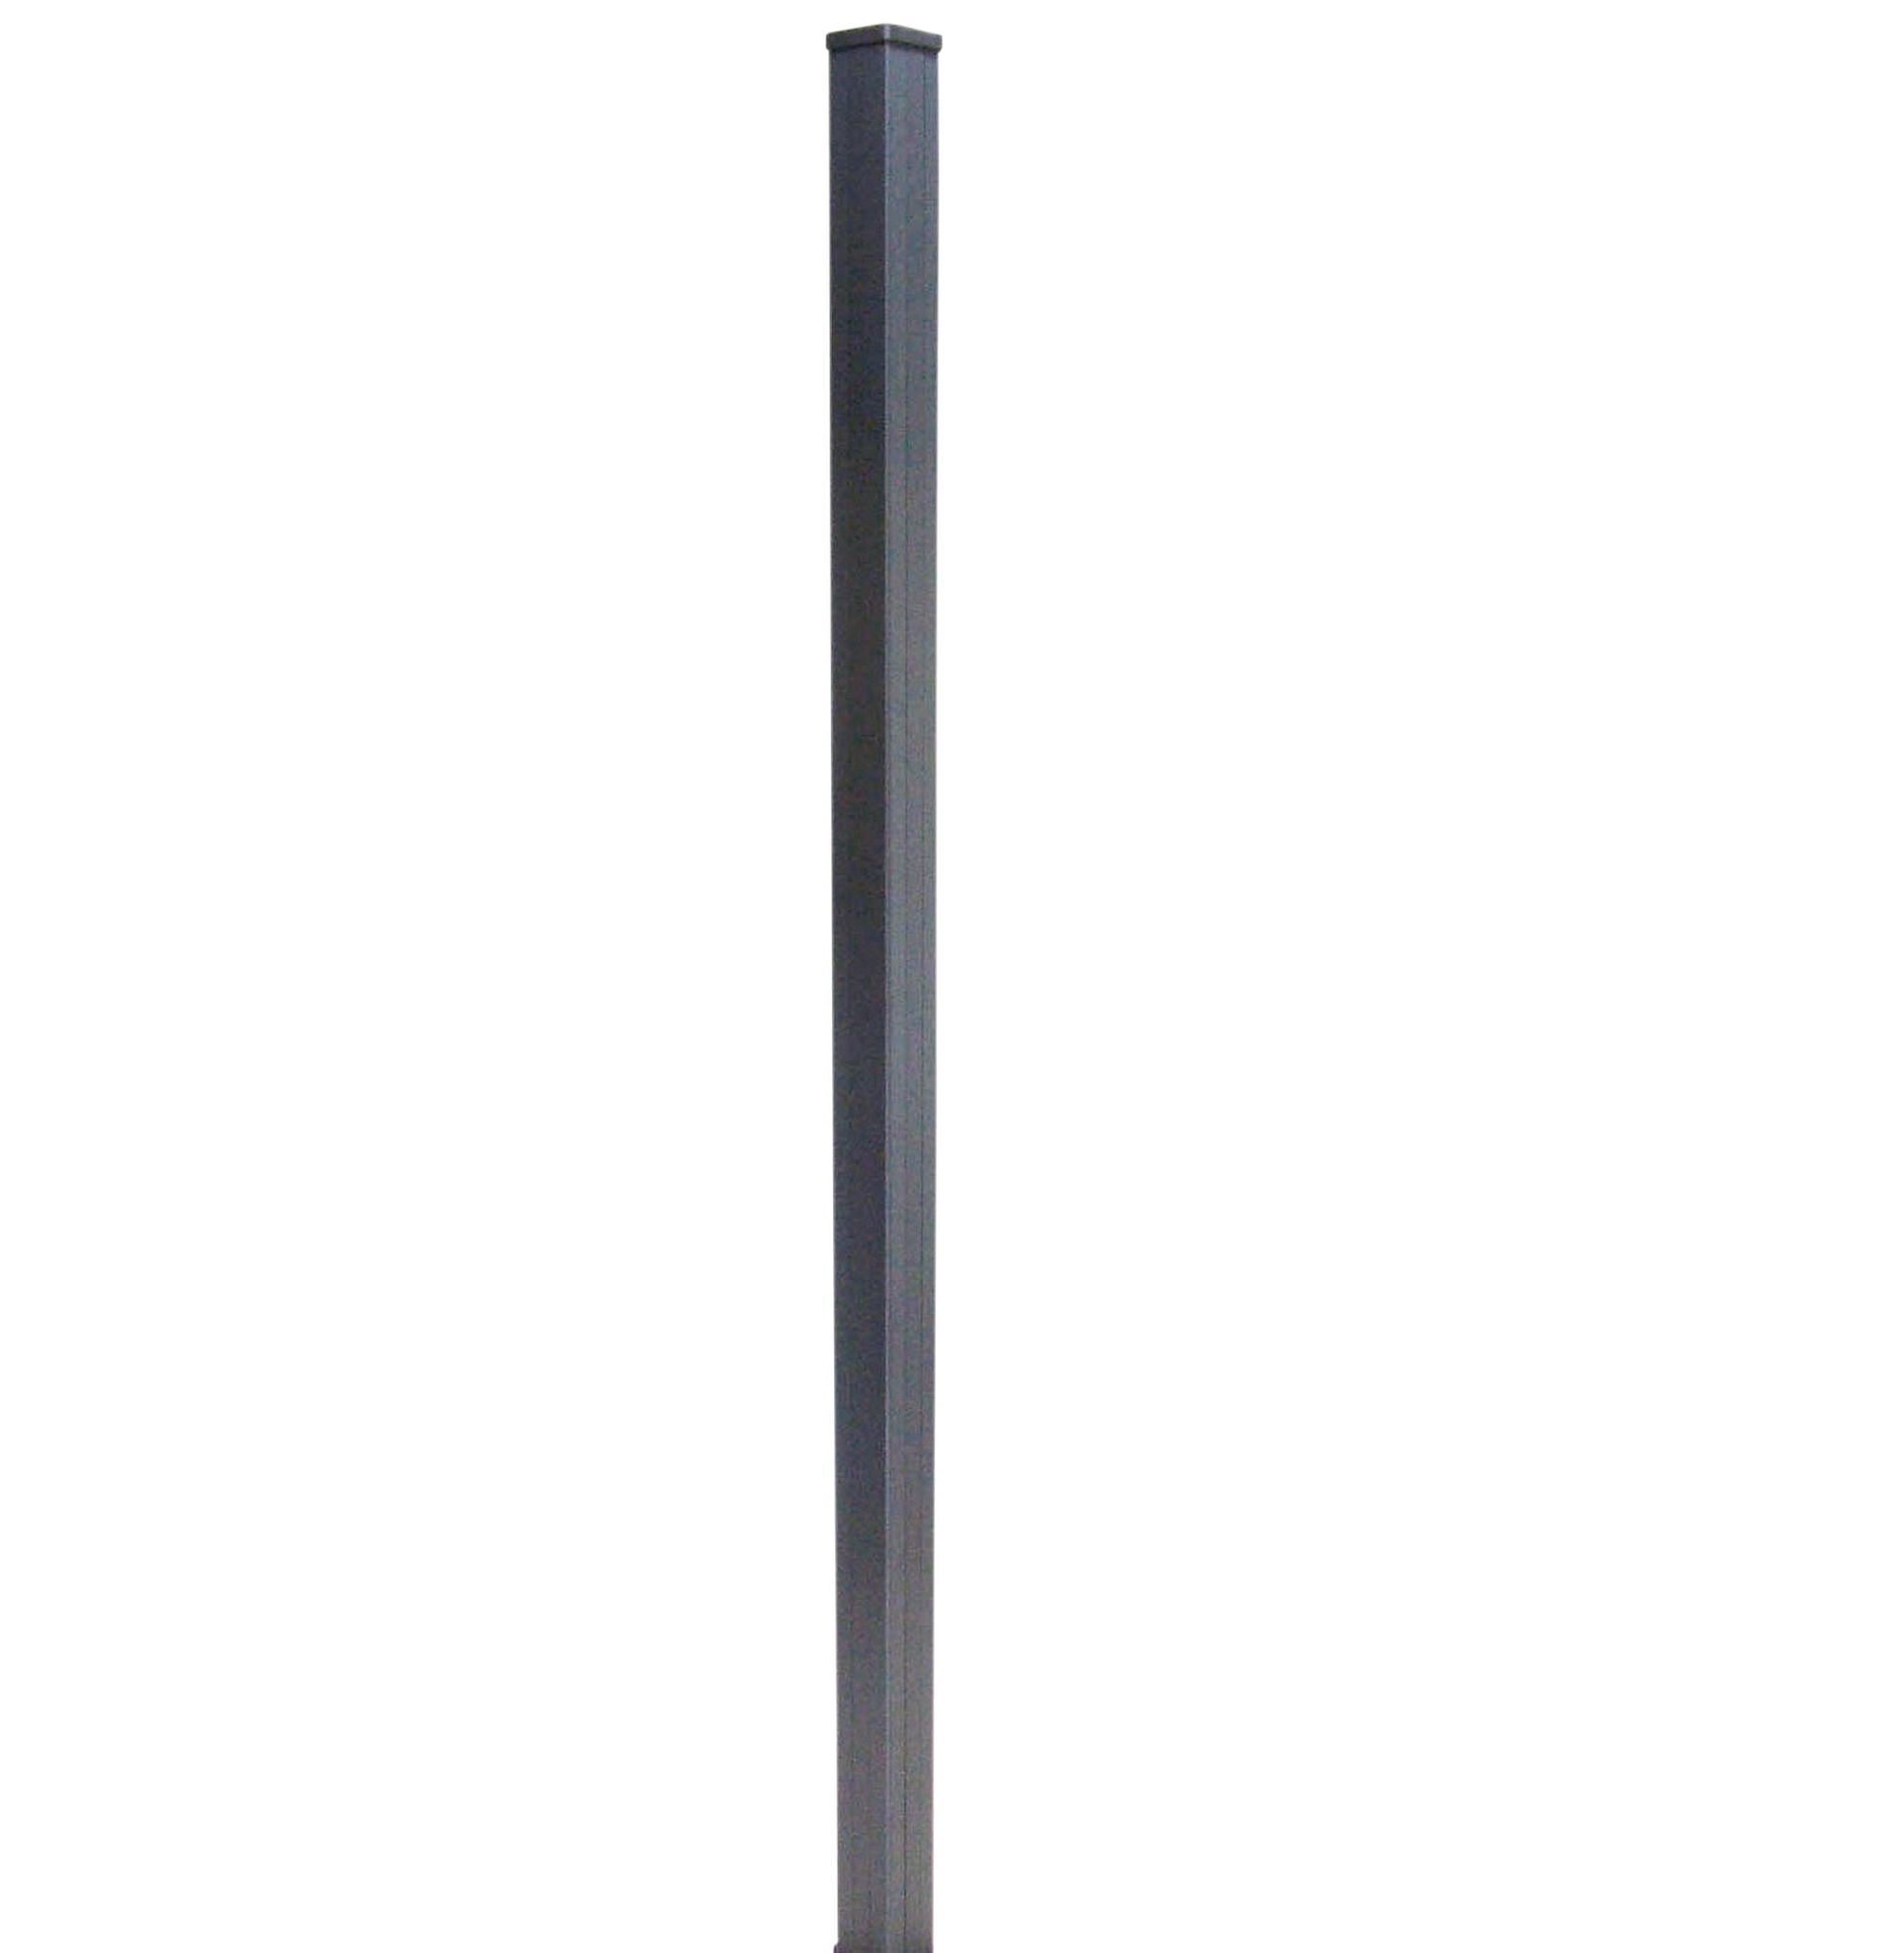 GoodHome Neva Taupe Square Metal Fence post (H)1.83m (W)70mm